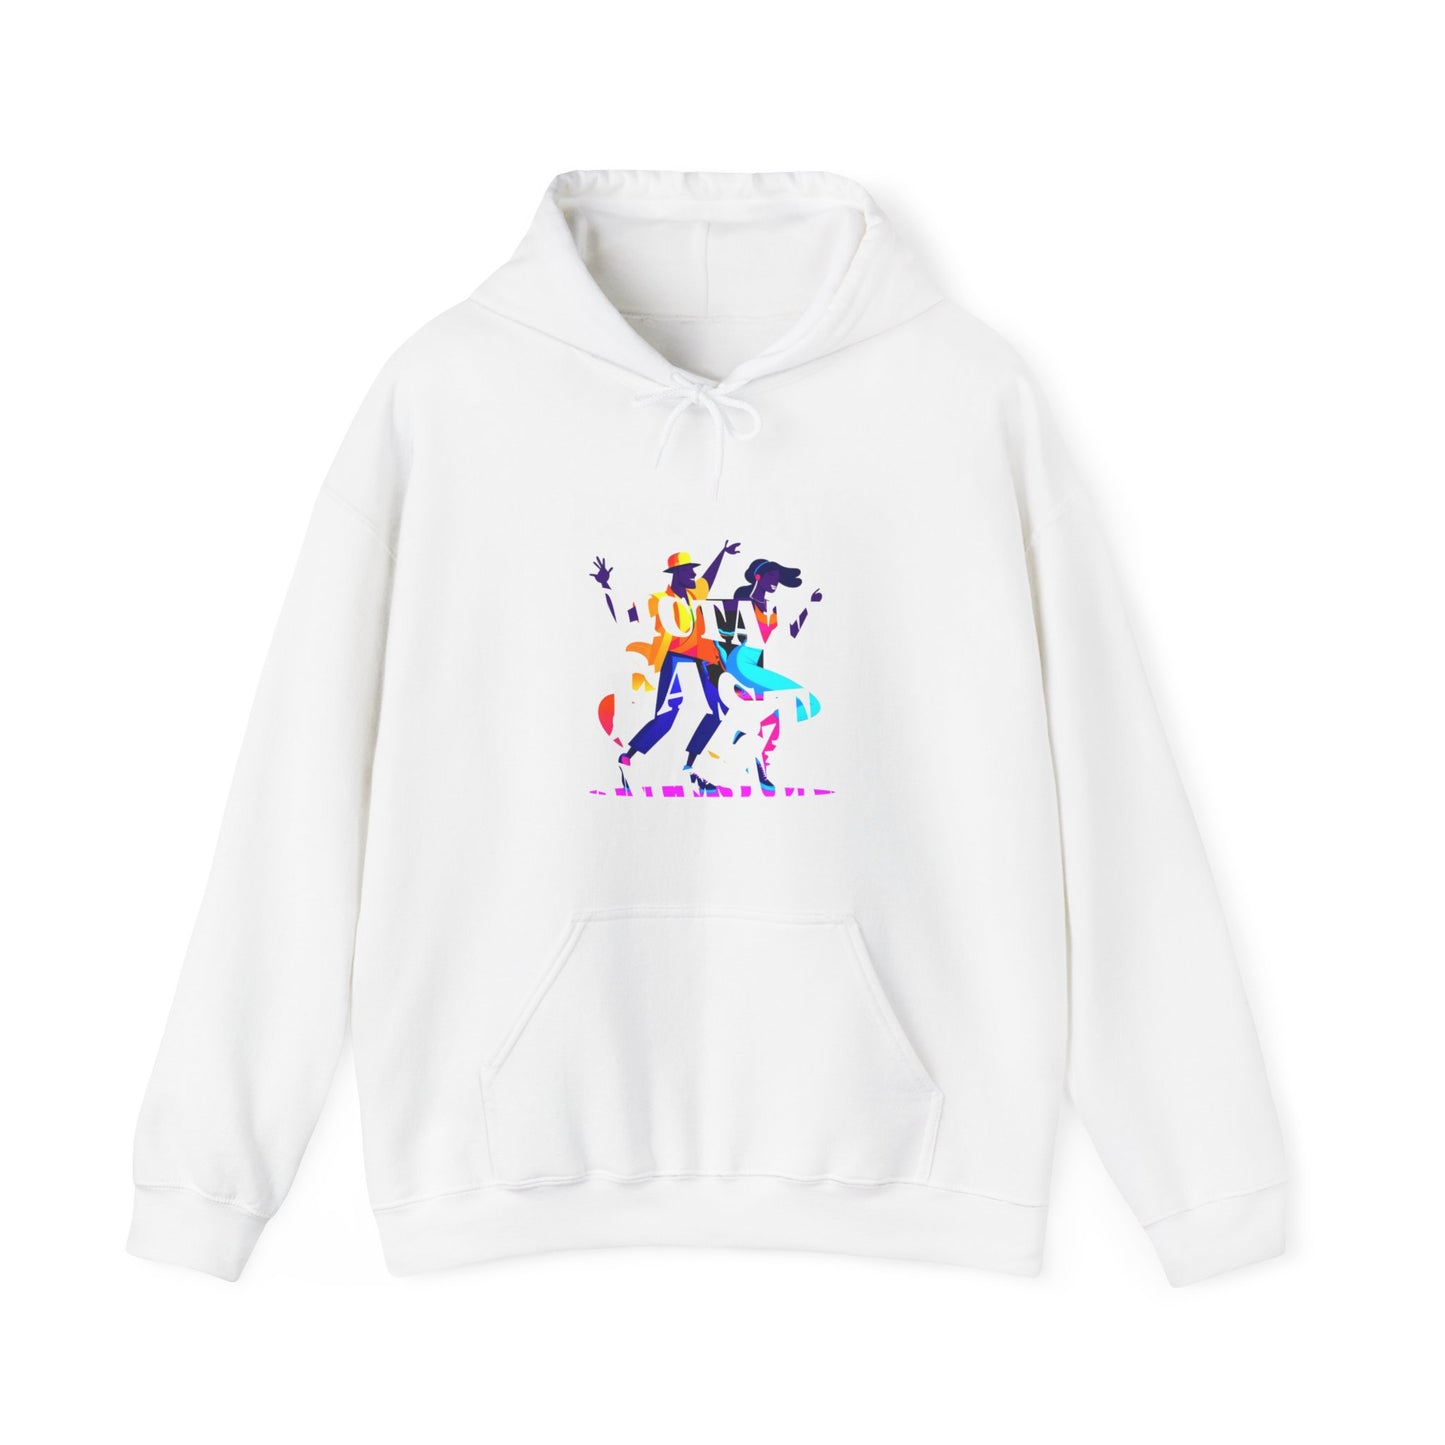 Unisex Heavy Blend™ Hooded Sweatshirt, Fast Beats Dictates Fast Dance Steps (white Fonts)